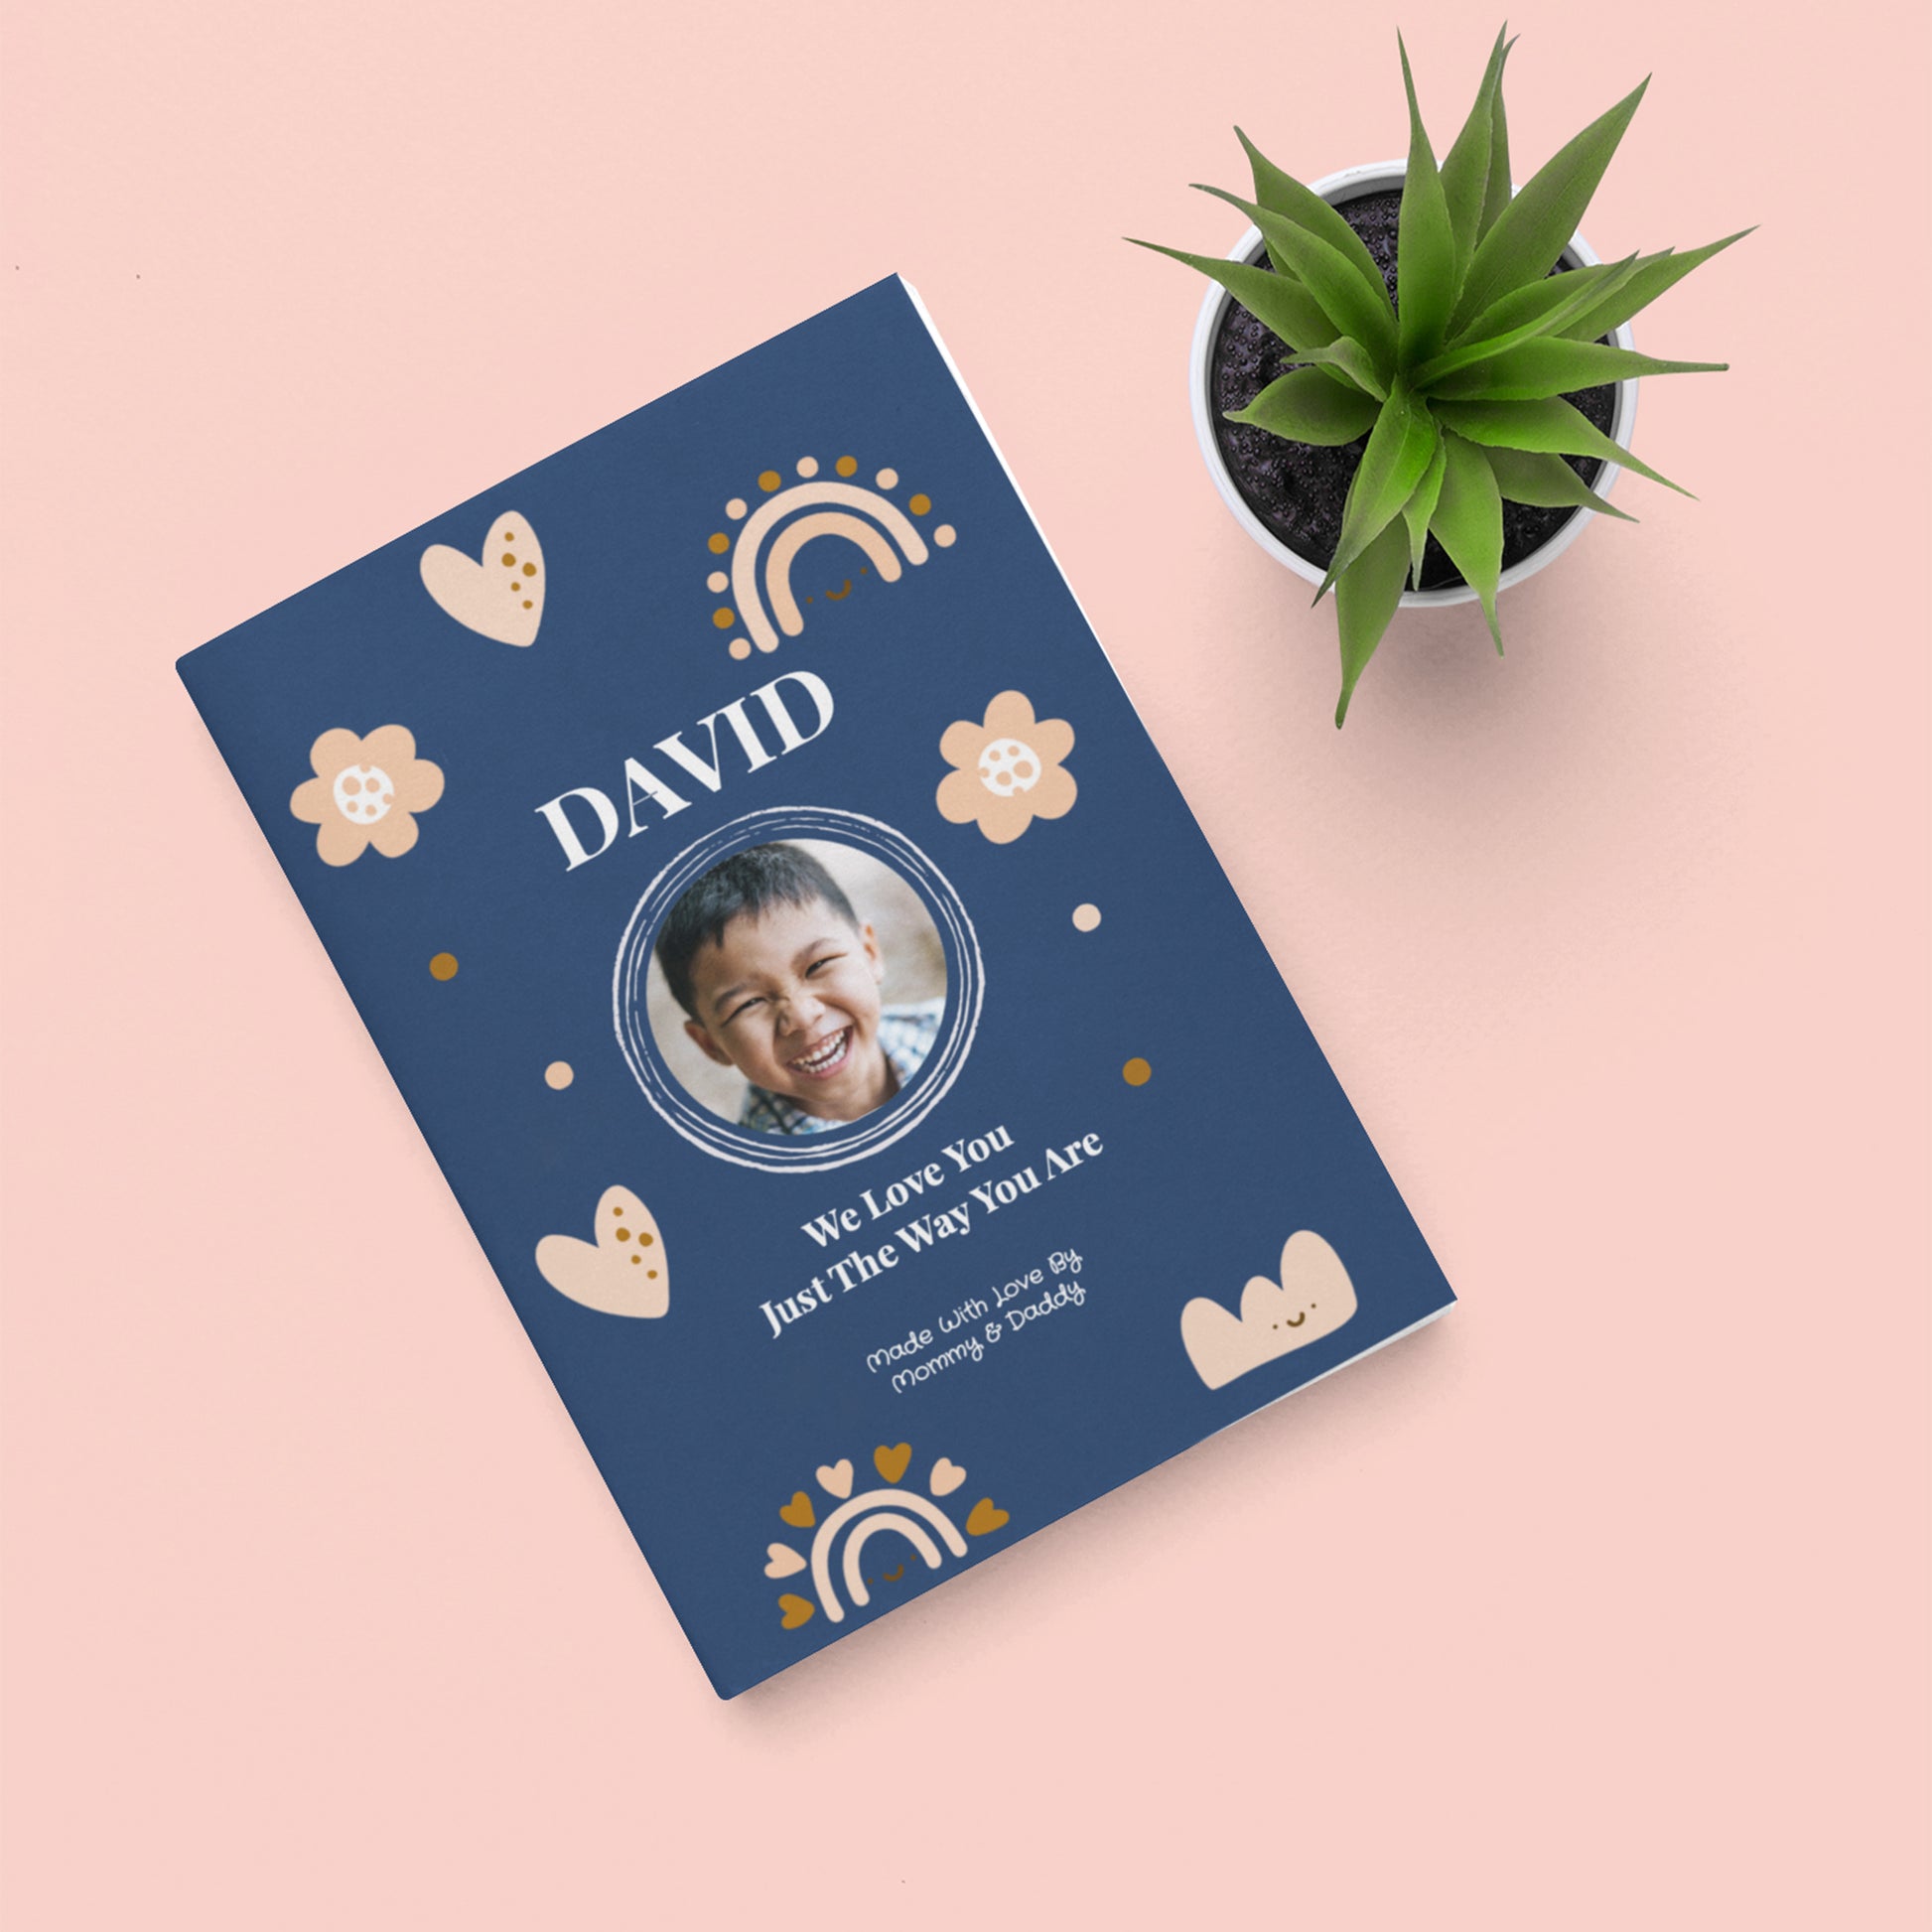 personalized children's books with photo and name. By Luhvee Books.